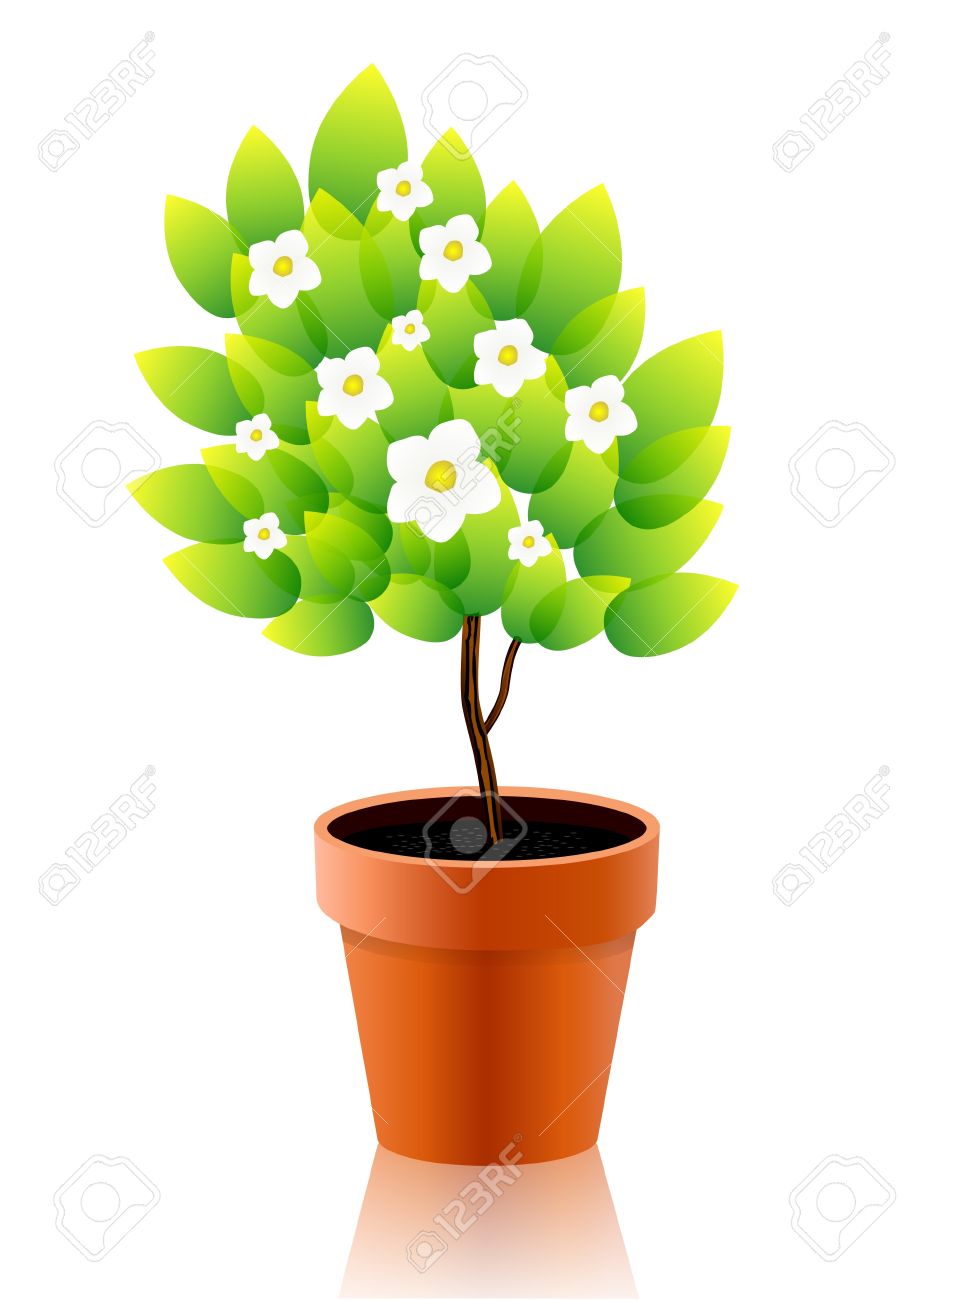 Growing Plant Clipart.